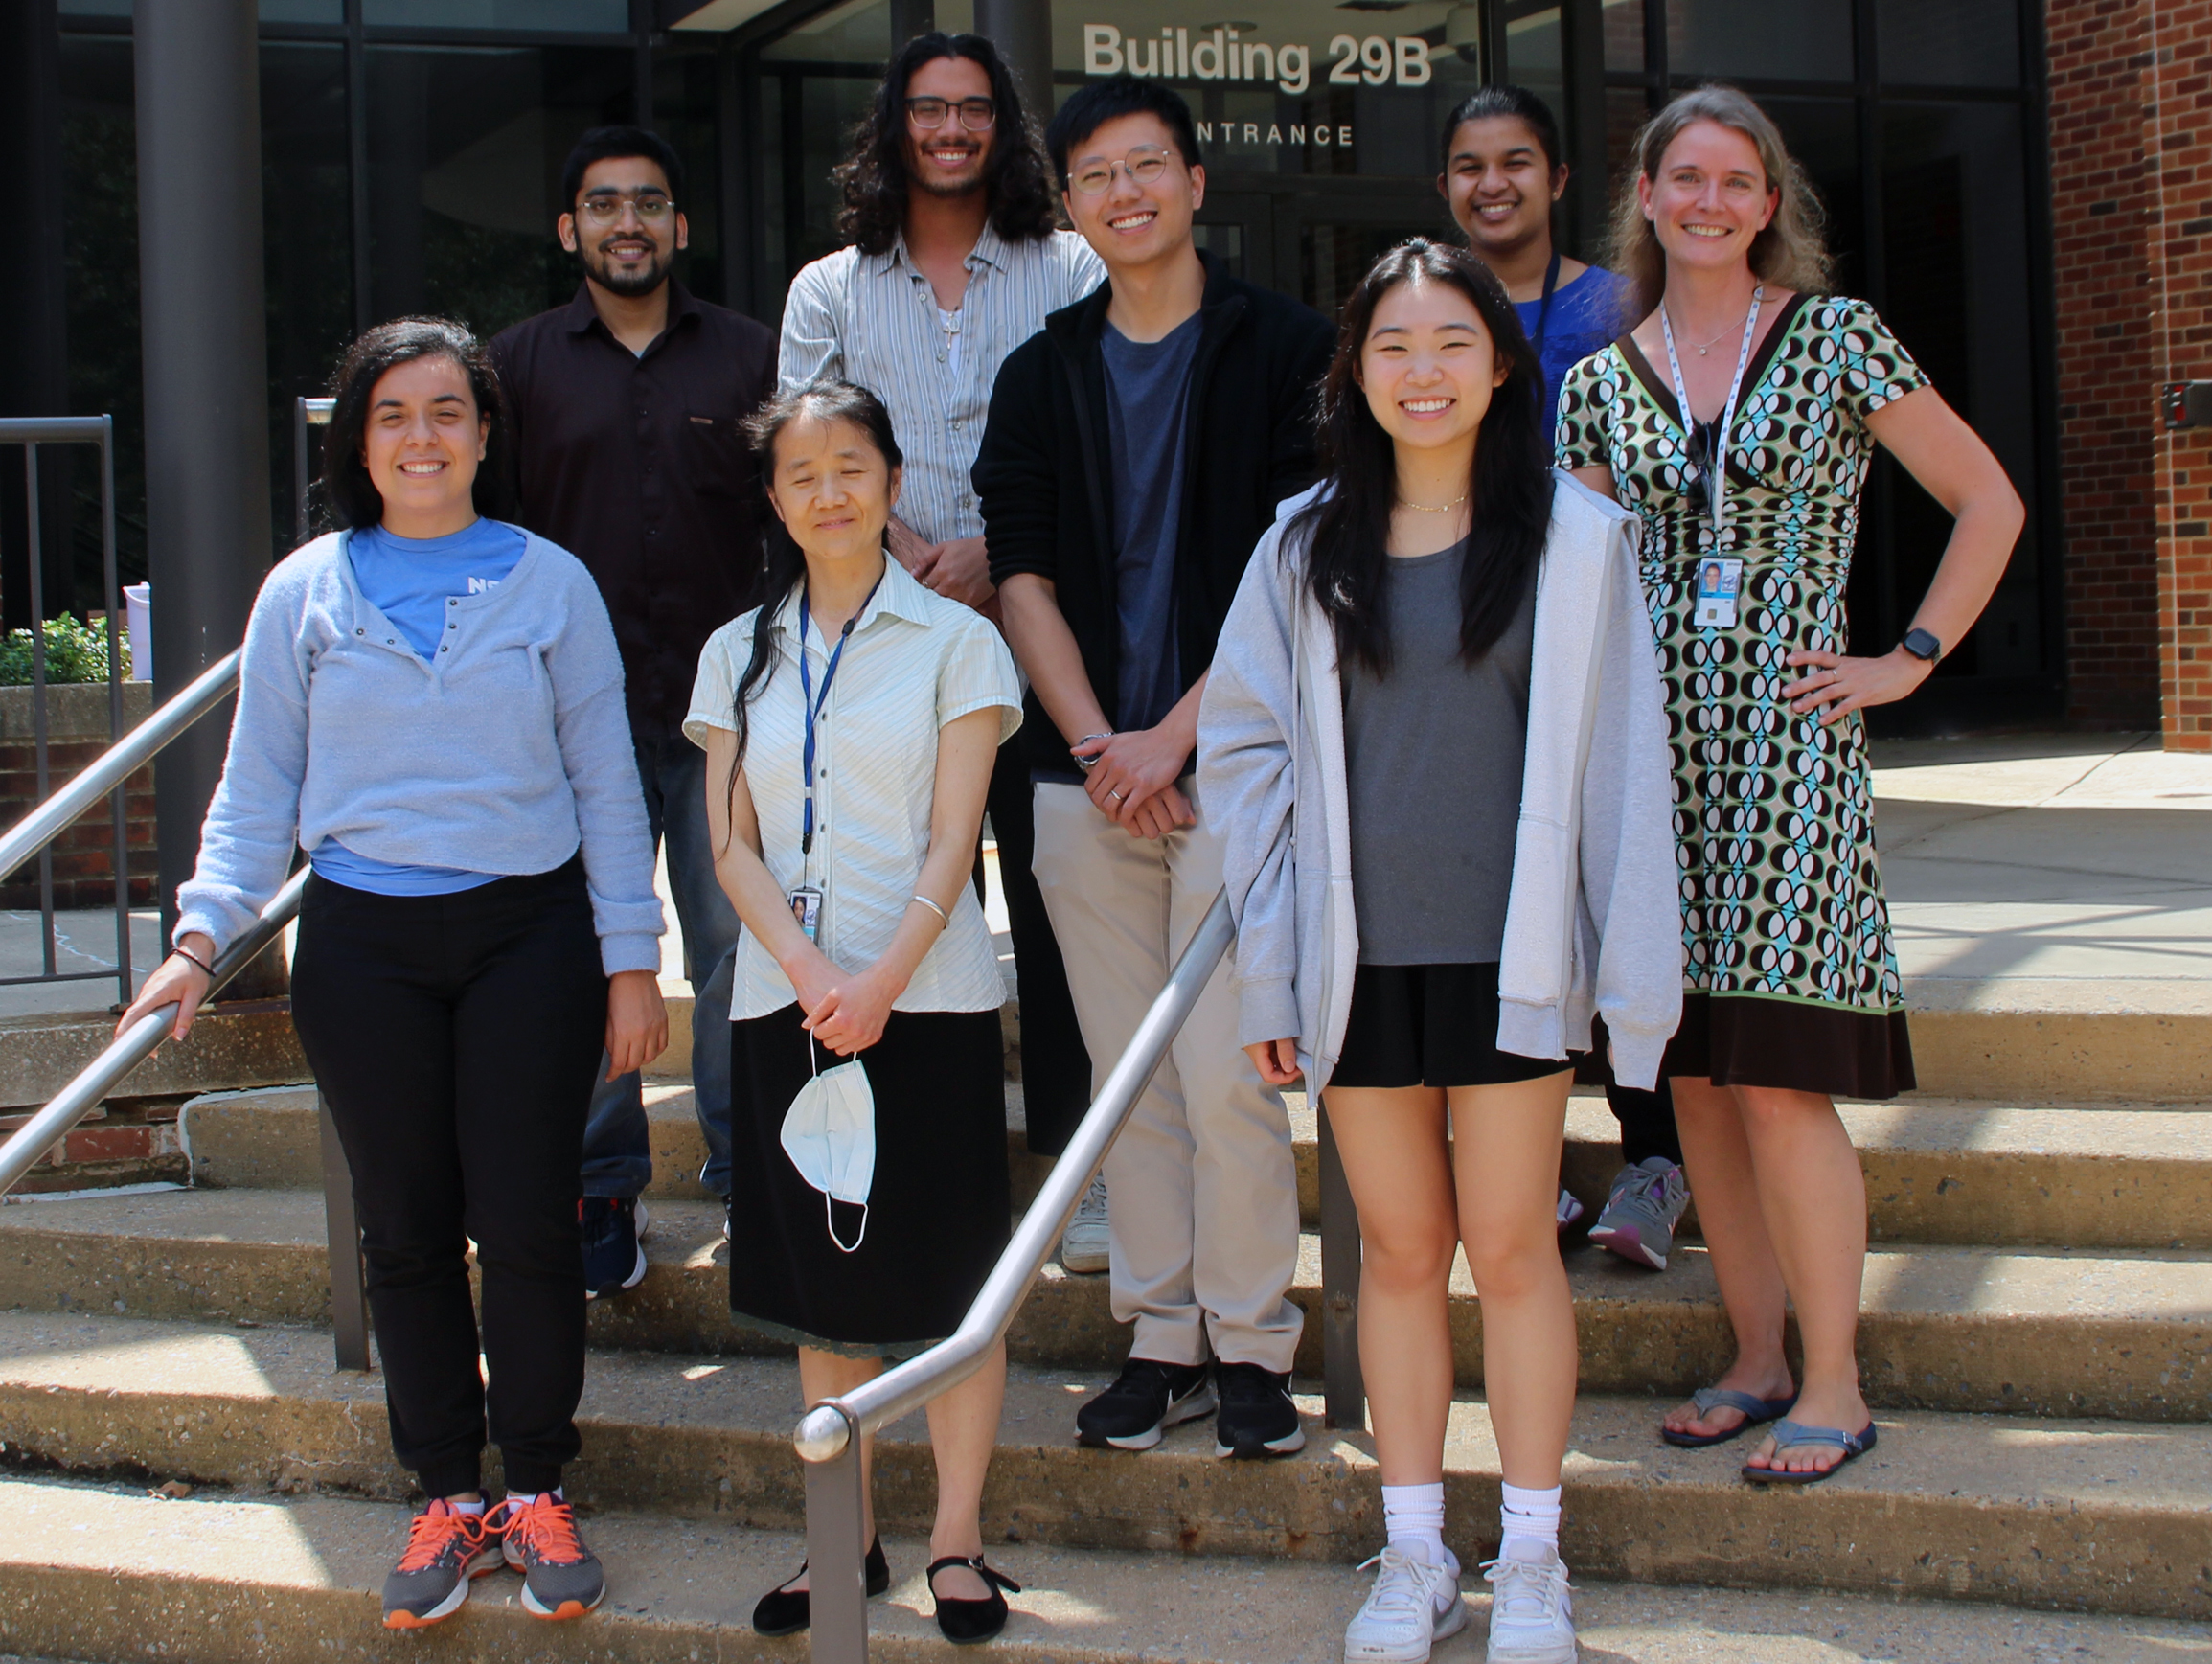 Lab group photo showing from the Matthies lab members.   Front row, left to right: Isadora Rocha De Abreu, Fei Zhou, and Jasmin Wu. Back row, left to right:  Zaid Madni, Patrick O’Reilly, Louis Tung Faat Lai, Jayashree Balaraman, and Doreen Matthies